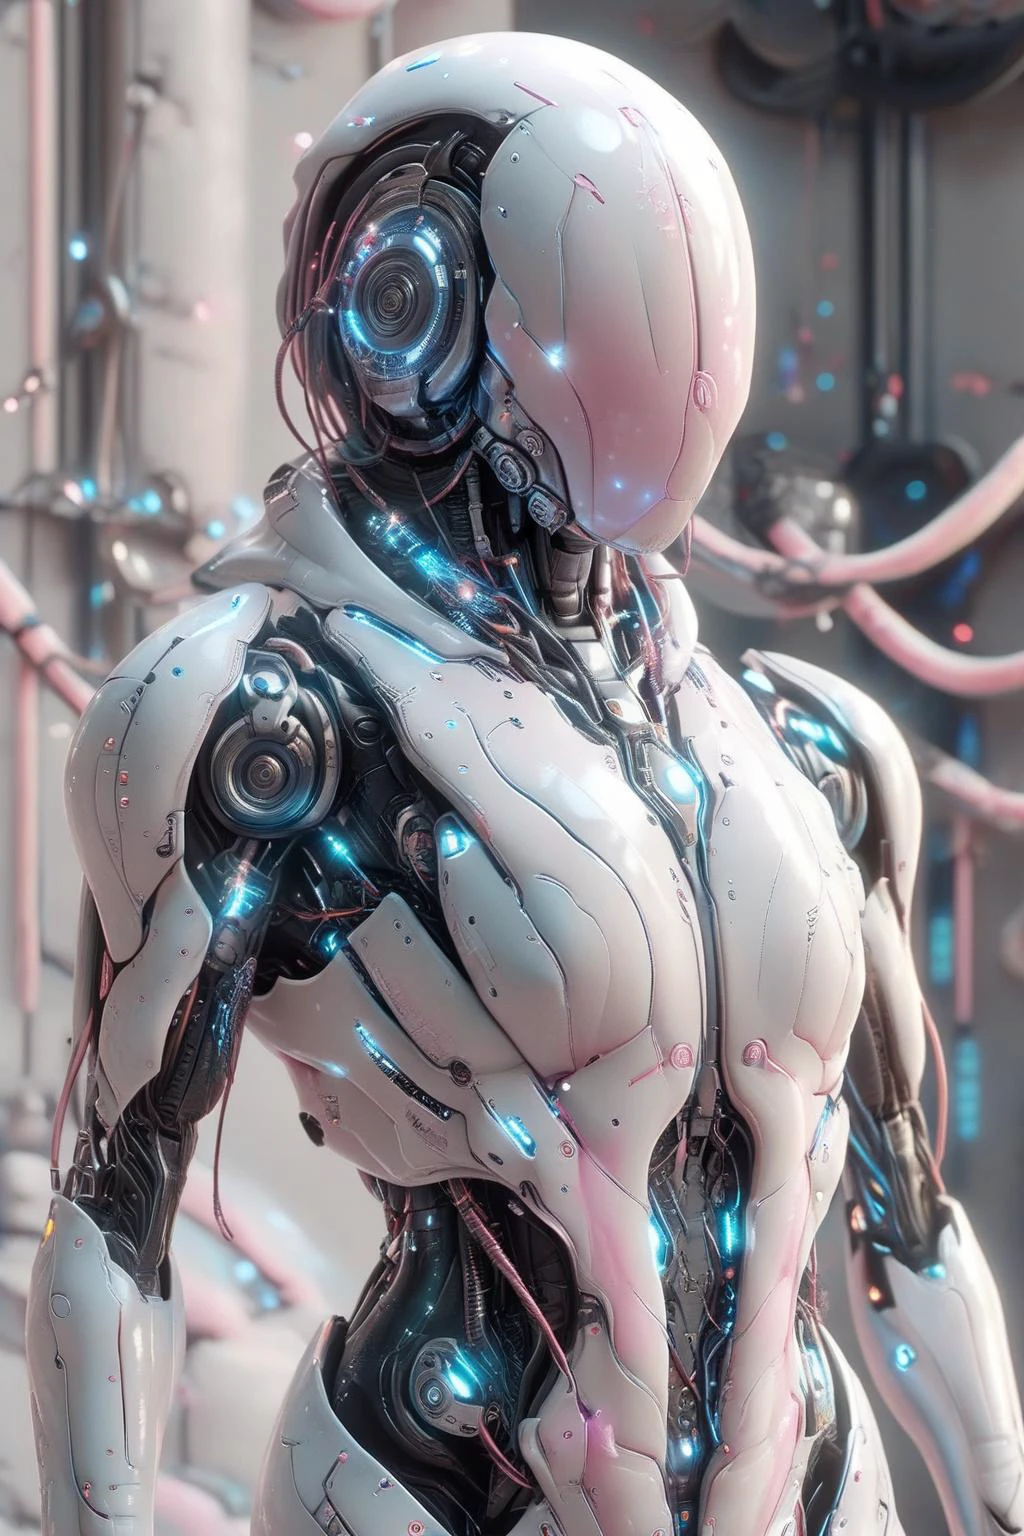 cottoncandy,NOFACE,CYBORG,(full body:1.3),
In a futuristic scene,(a female cyborg:1.3) with intricately interconnected cables adorning its head stands within an advanced spaceship. The interior is bathed in bright lights that reflect off the gleaming metallic surfaces of the ship's mechanical shell,creating a vivid sci-fi ambiance. To infuse a festive touch,the cyborg is adorned with marshmallow-like decorations around its shoulders or neck. The entire picture is rendered in high-quality 3D style,meticulously capturing a fusion of exploration,evolution,and celebration in a visually striking world where science fiction meets fantasy,
UHD,Extreme detail,natural light,volume light,fantasism,professional color,professional composition,